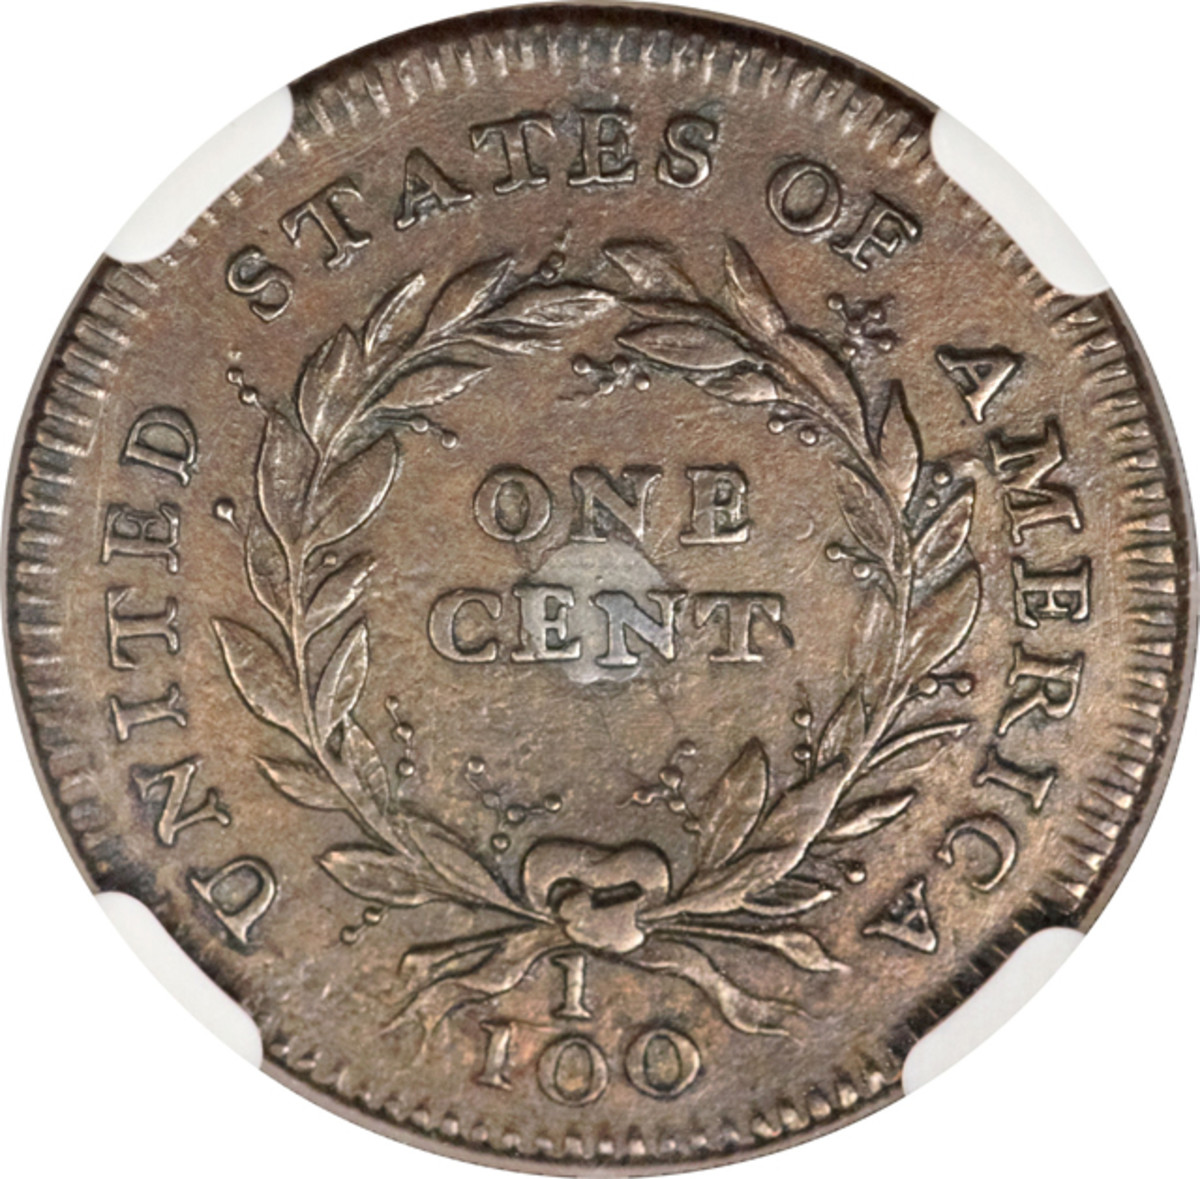 Reverse of the 1792 silver-center cent.